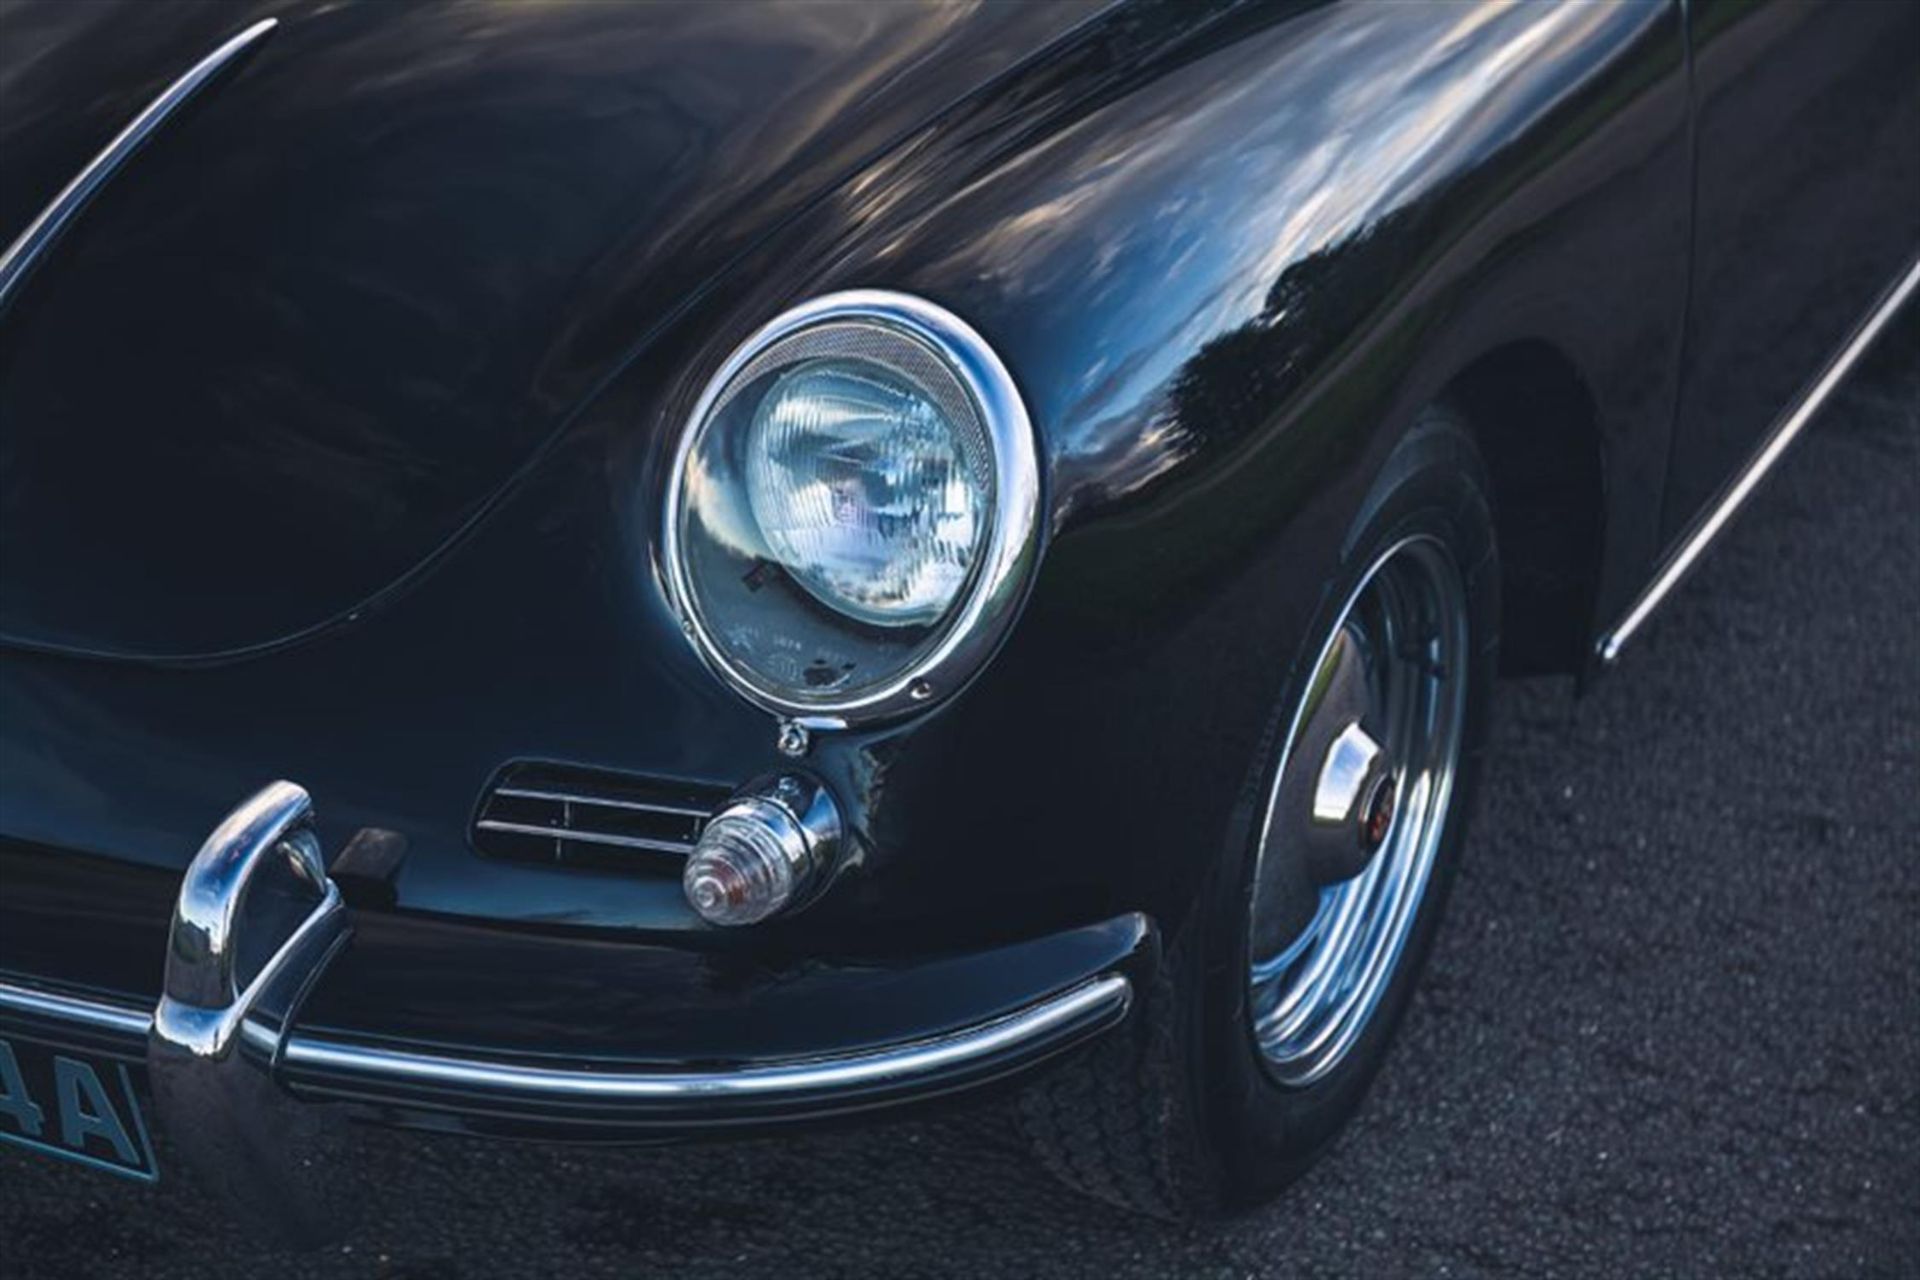 1963 Porsche 356 B T6 Coupe to ‘S’ Specification - Image 9 of 10